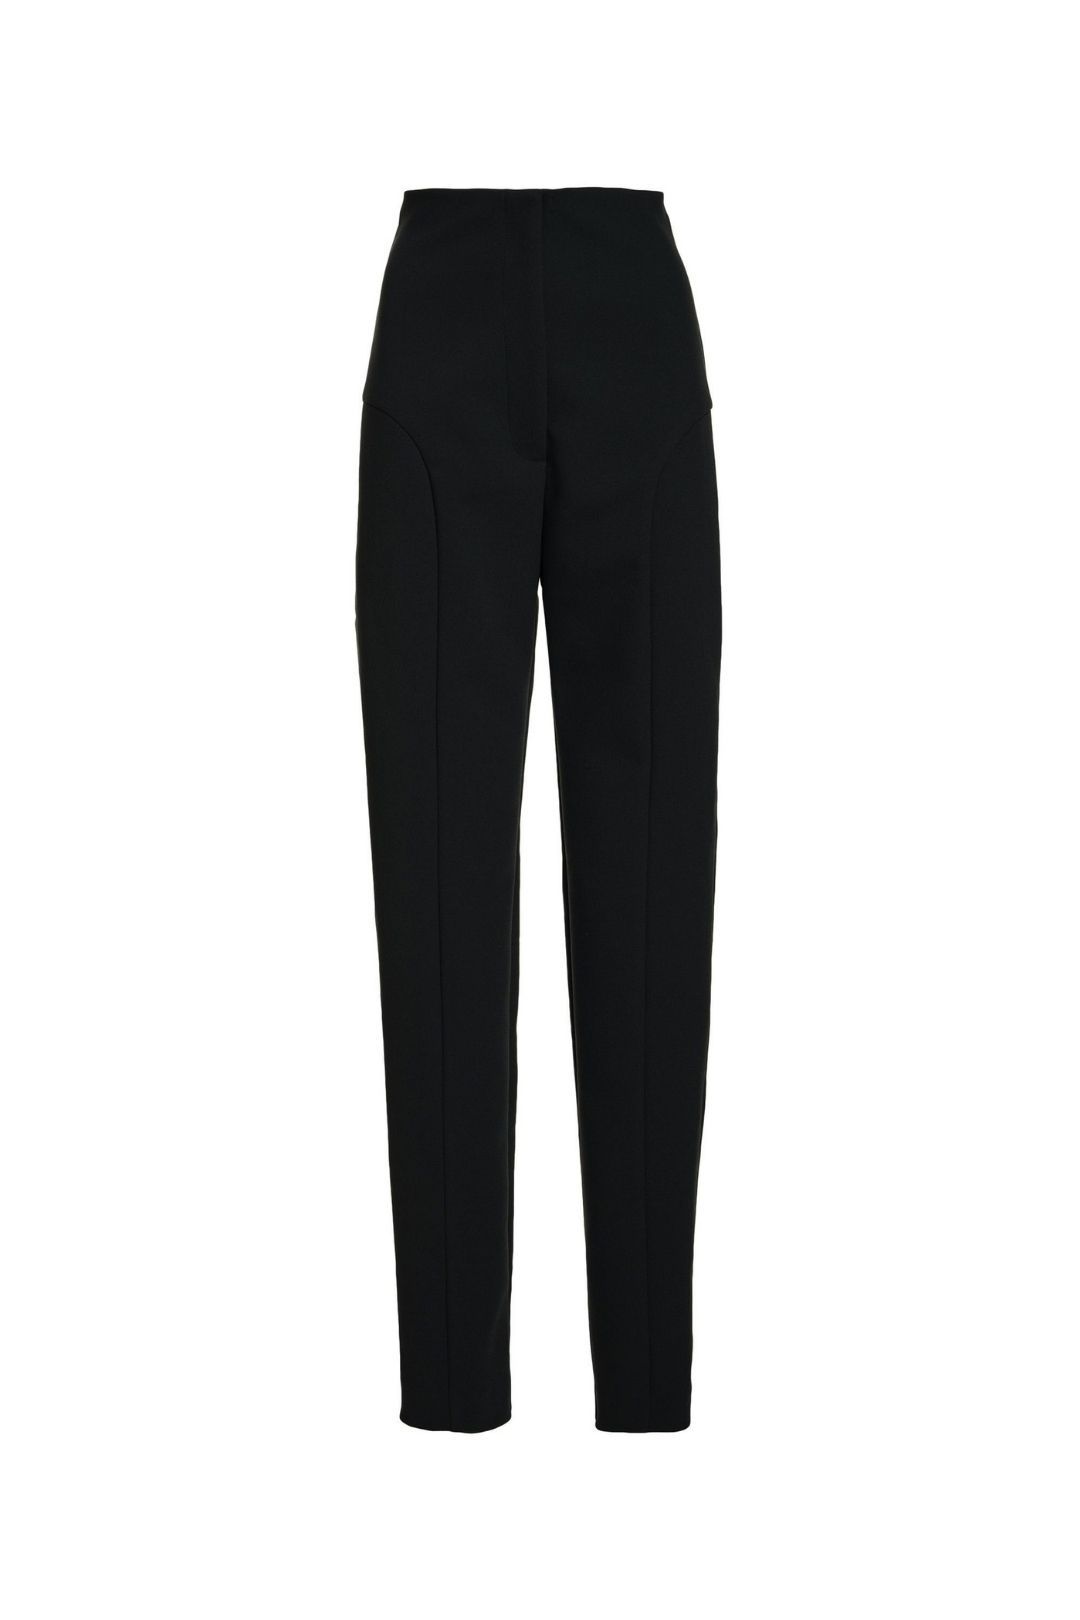 Citizens Of Humanity Daphne High Rise Stovepipe trousers - Porcelain |  Garmentory